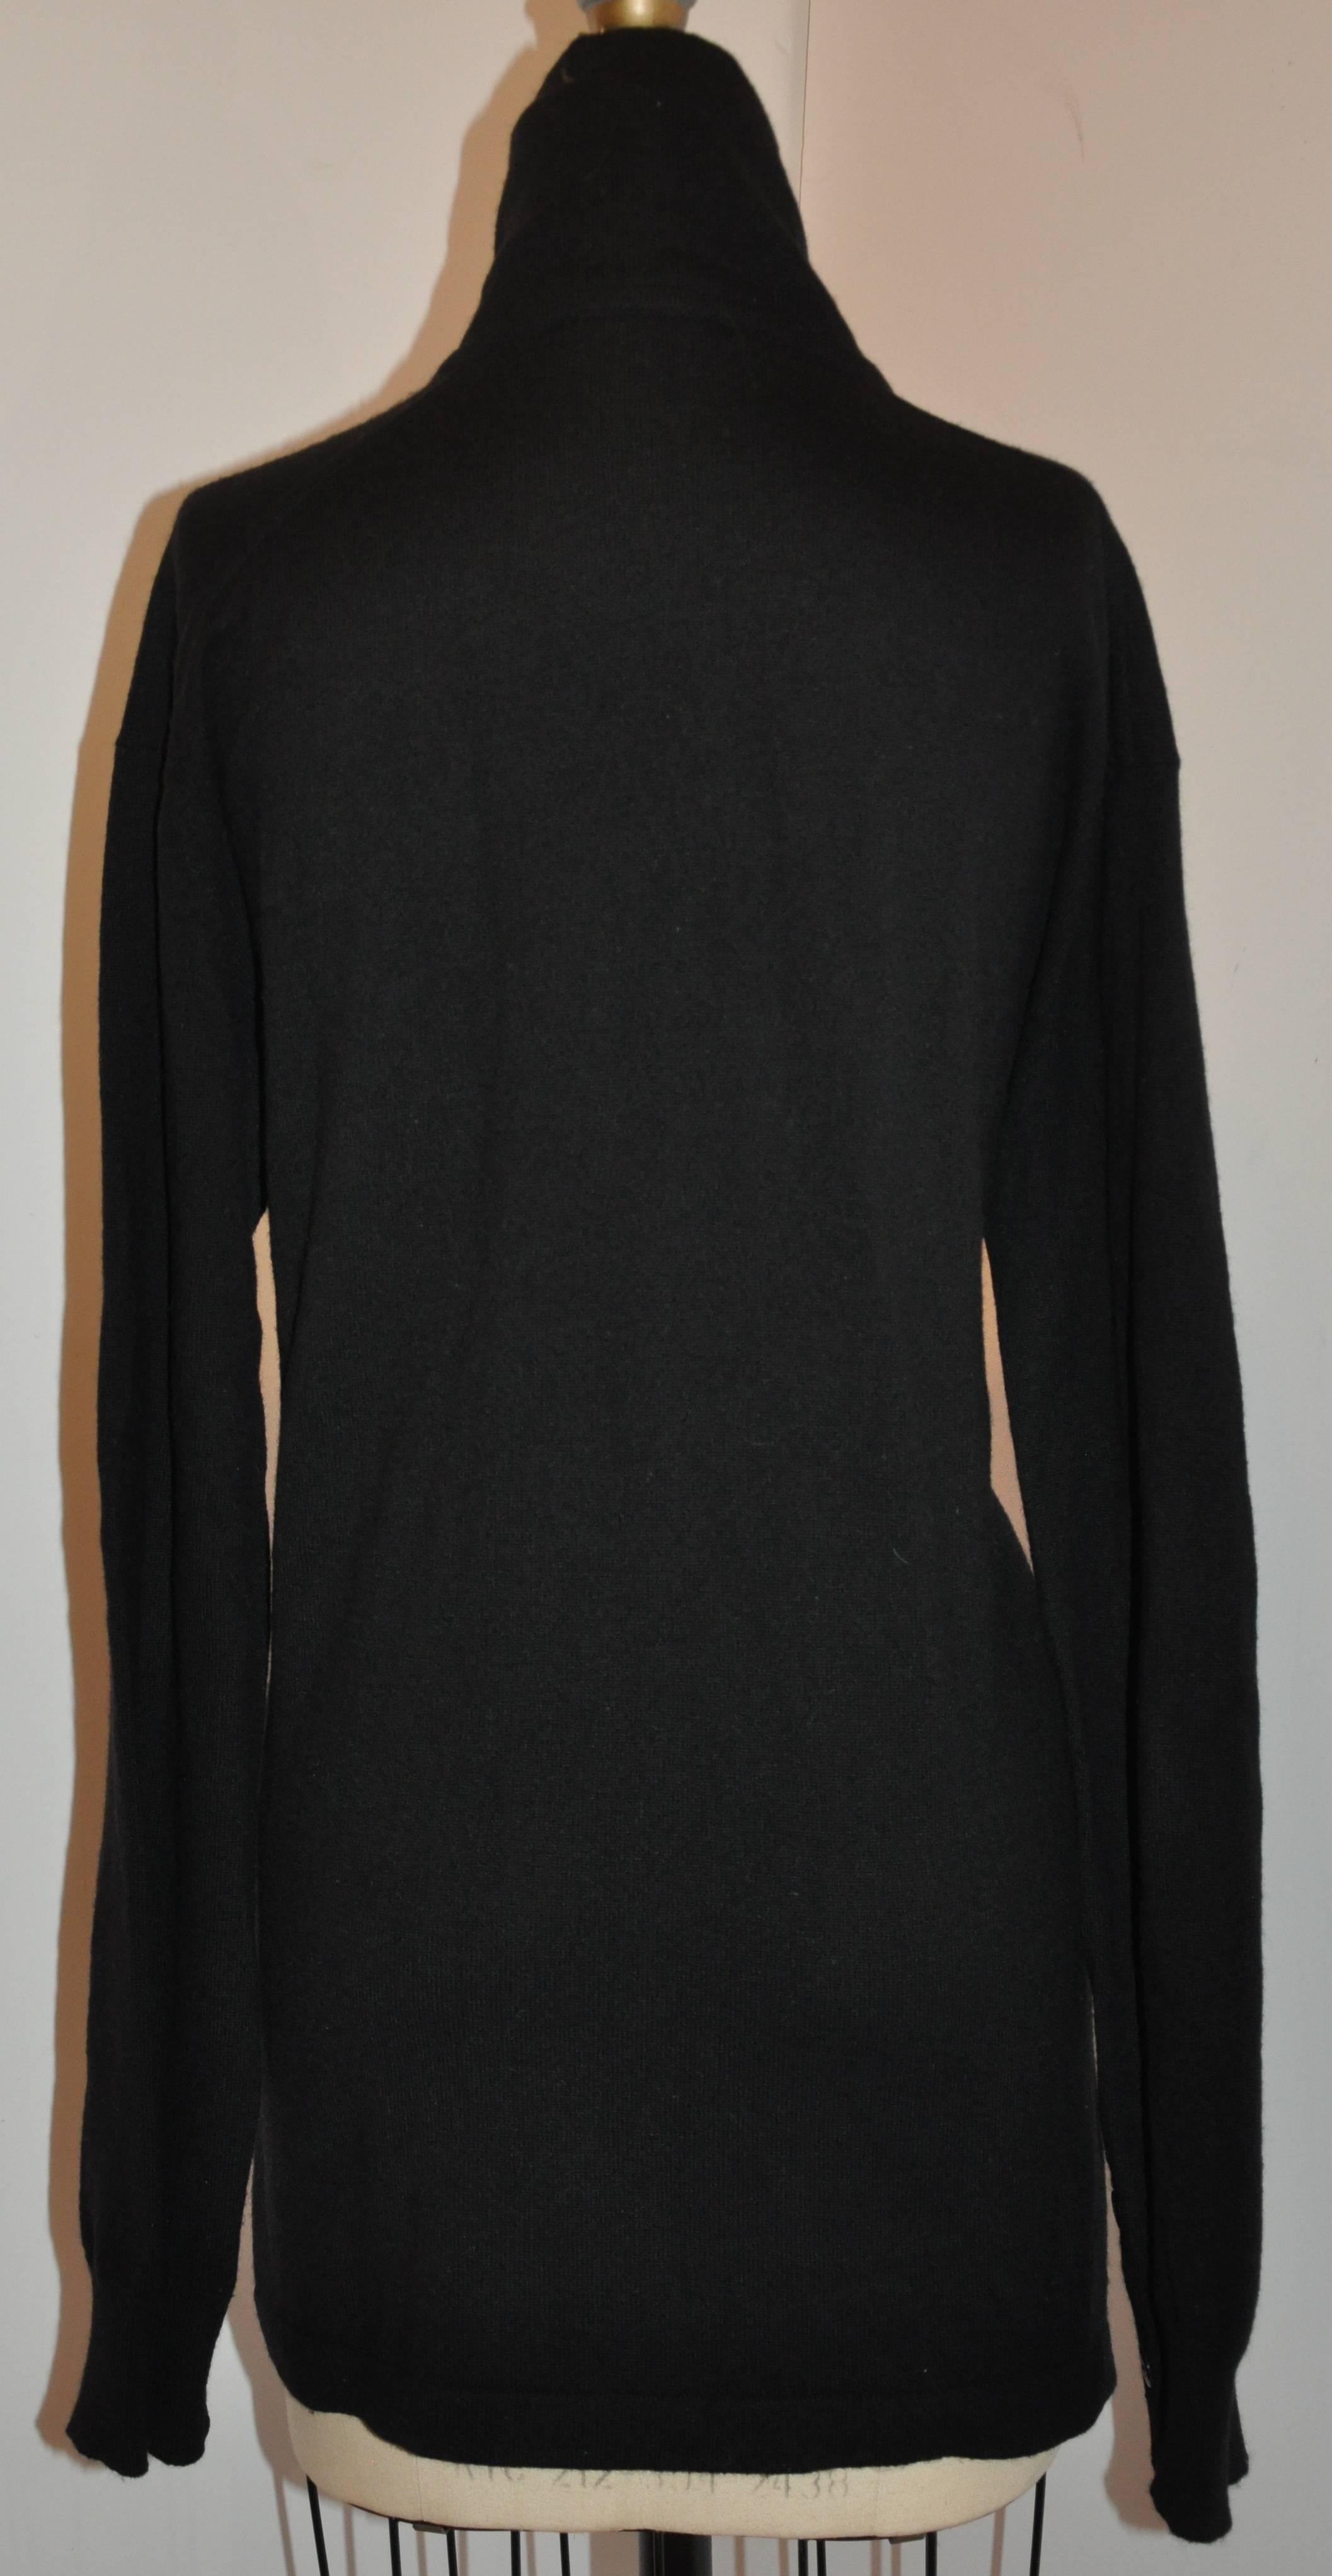           Donna Karan's wonderfully soft black Scottish cashmere pullover features a deep V front combined with a wonderful cowl neck collar which measures 5